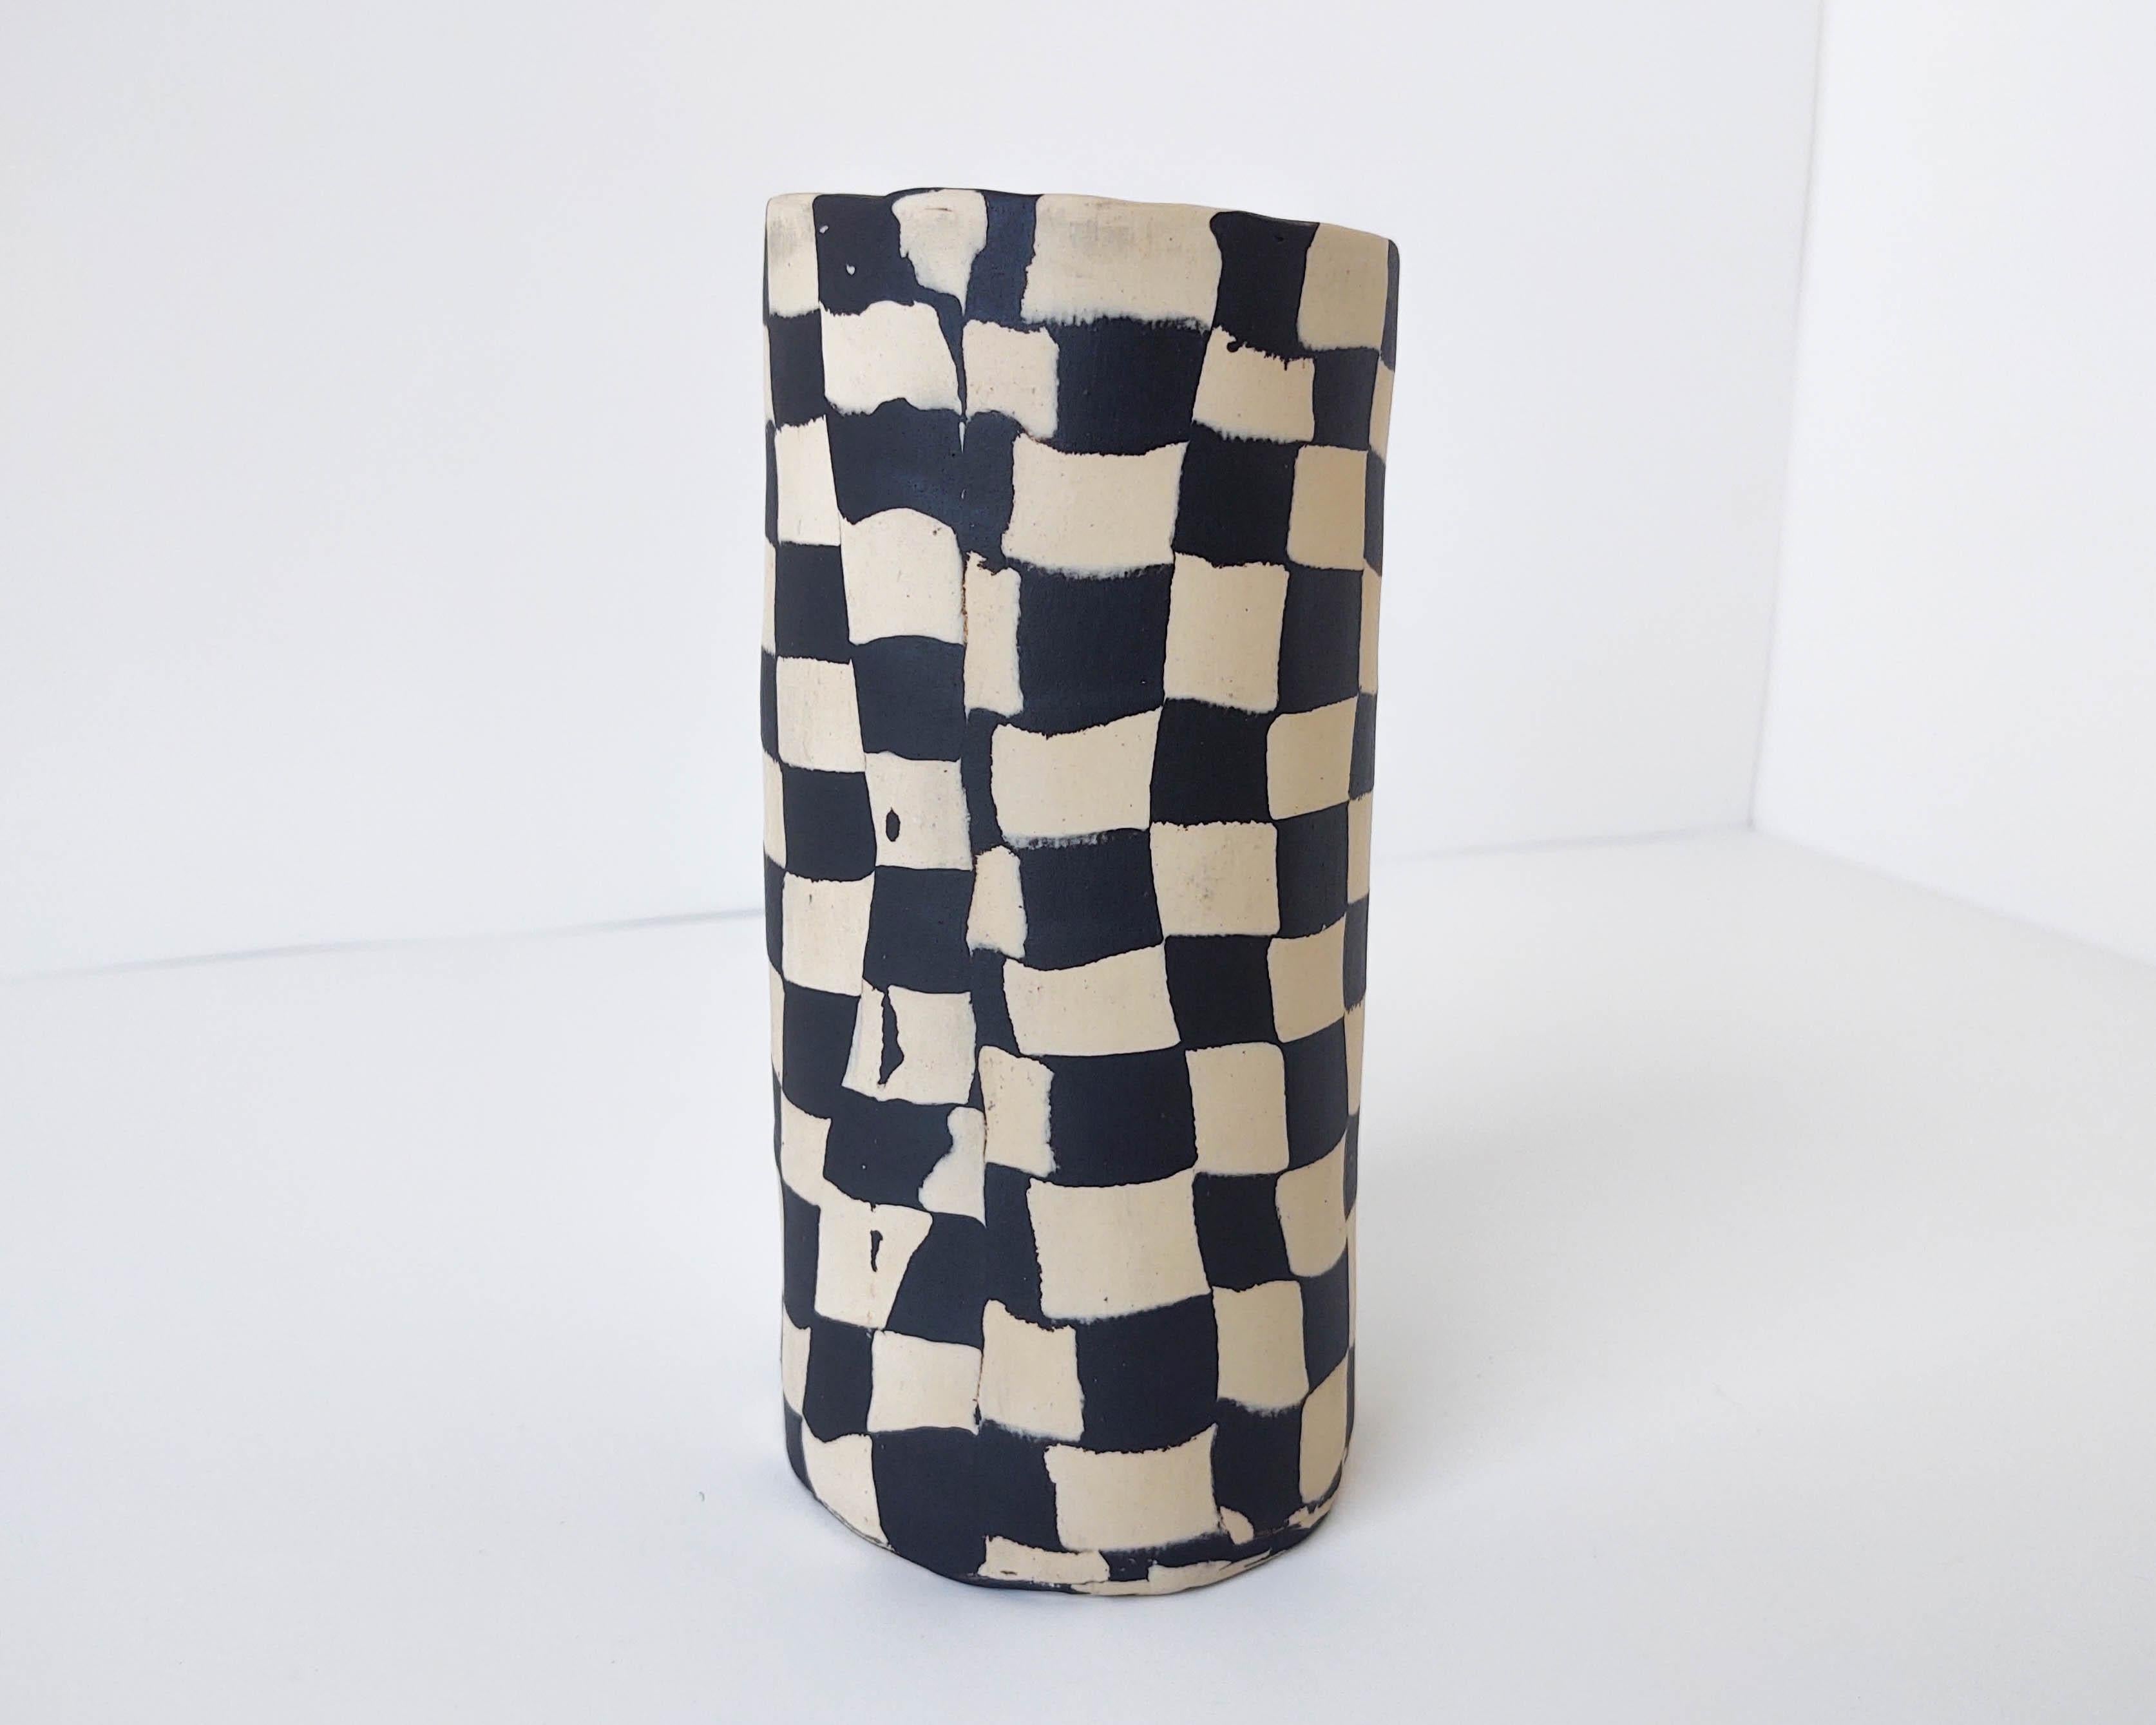 Handmade Nerikomi vase with two types of clay. Made and fired in Los Angeles by Fizzy Ceramics in 2021. Unglazed on the outside and black matte on the inside still revealing the checker pattern. Fired to cone 5 in oxidation, each piece is watertight